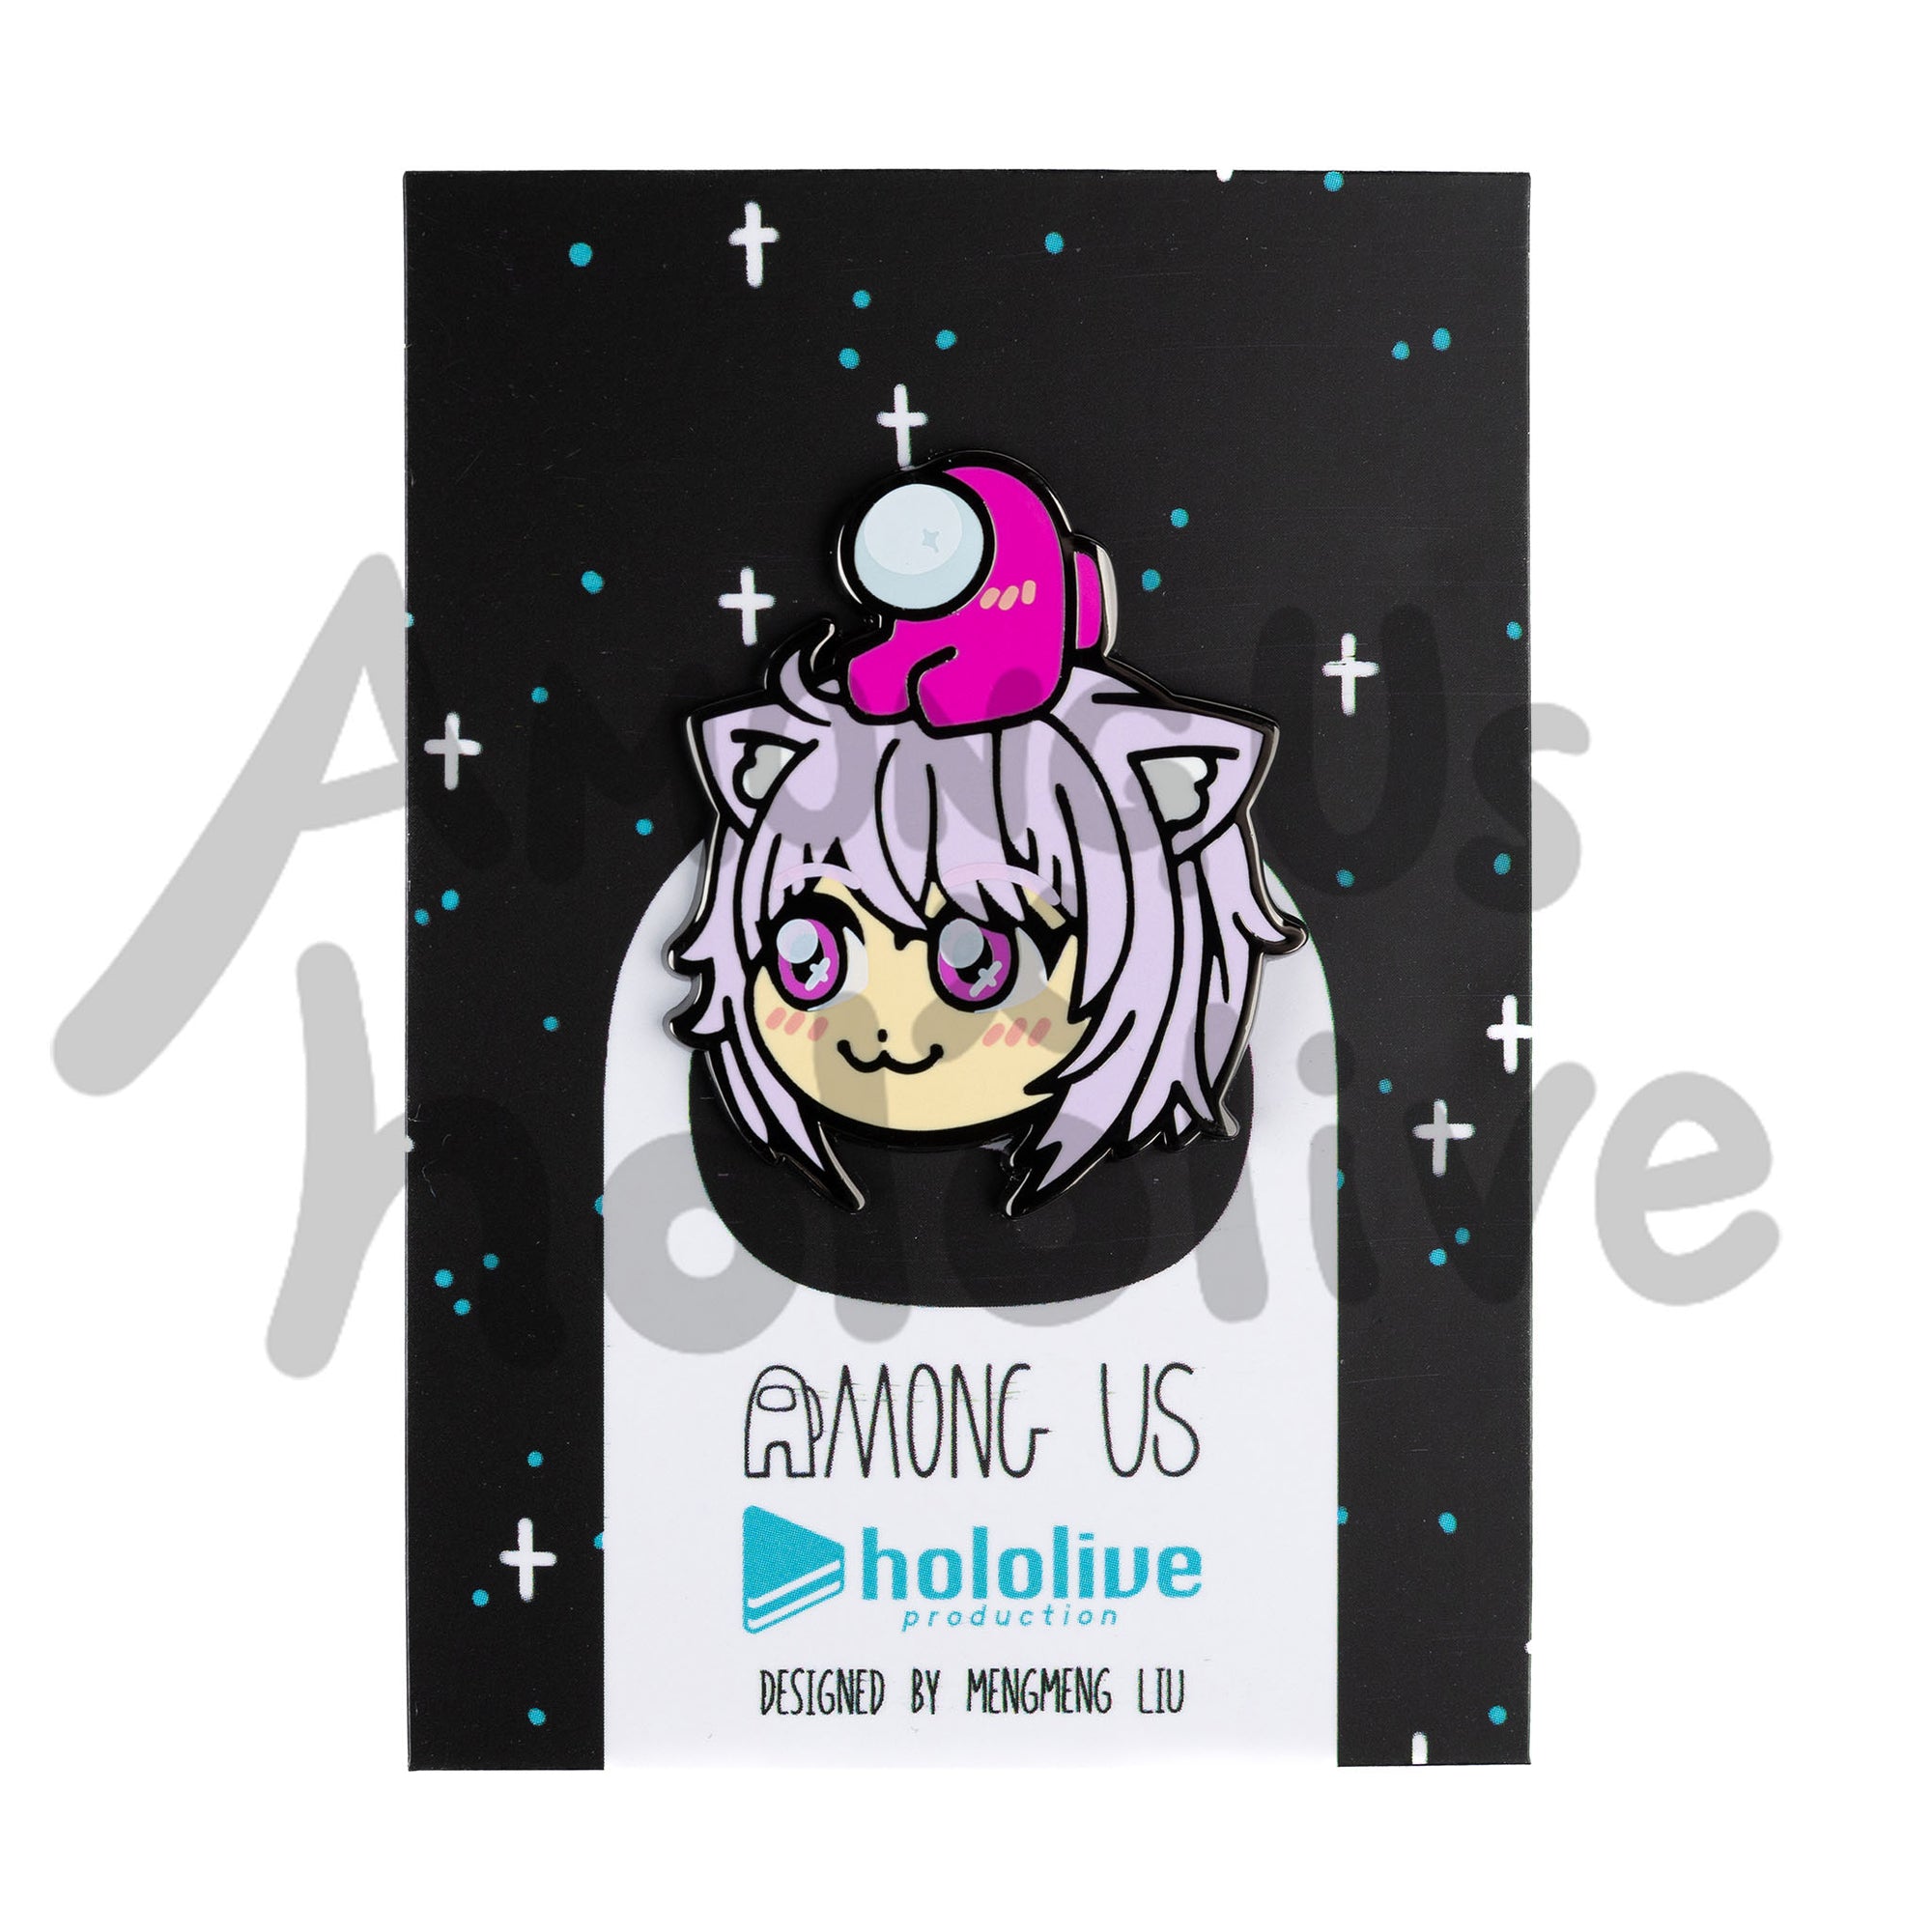 Enamel Pin of Nekomata Okayu's Face from Hololive. Okayu has fair skin, magenta sparkly eyes, and pastel purple bobbed hair with matching purple cat ears. There's a Pink Crewmate sitting atop her head. Both characters have pink blush marks on their faces.